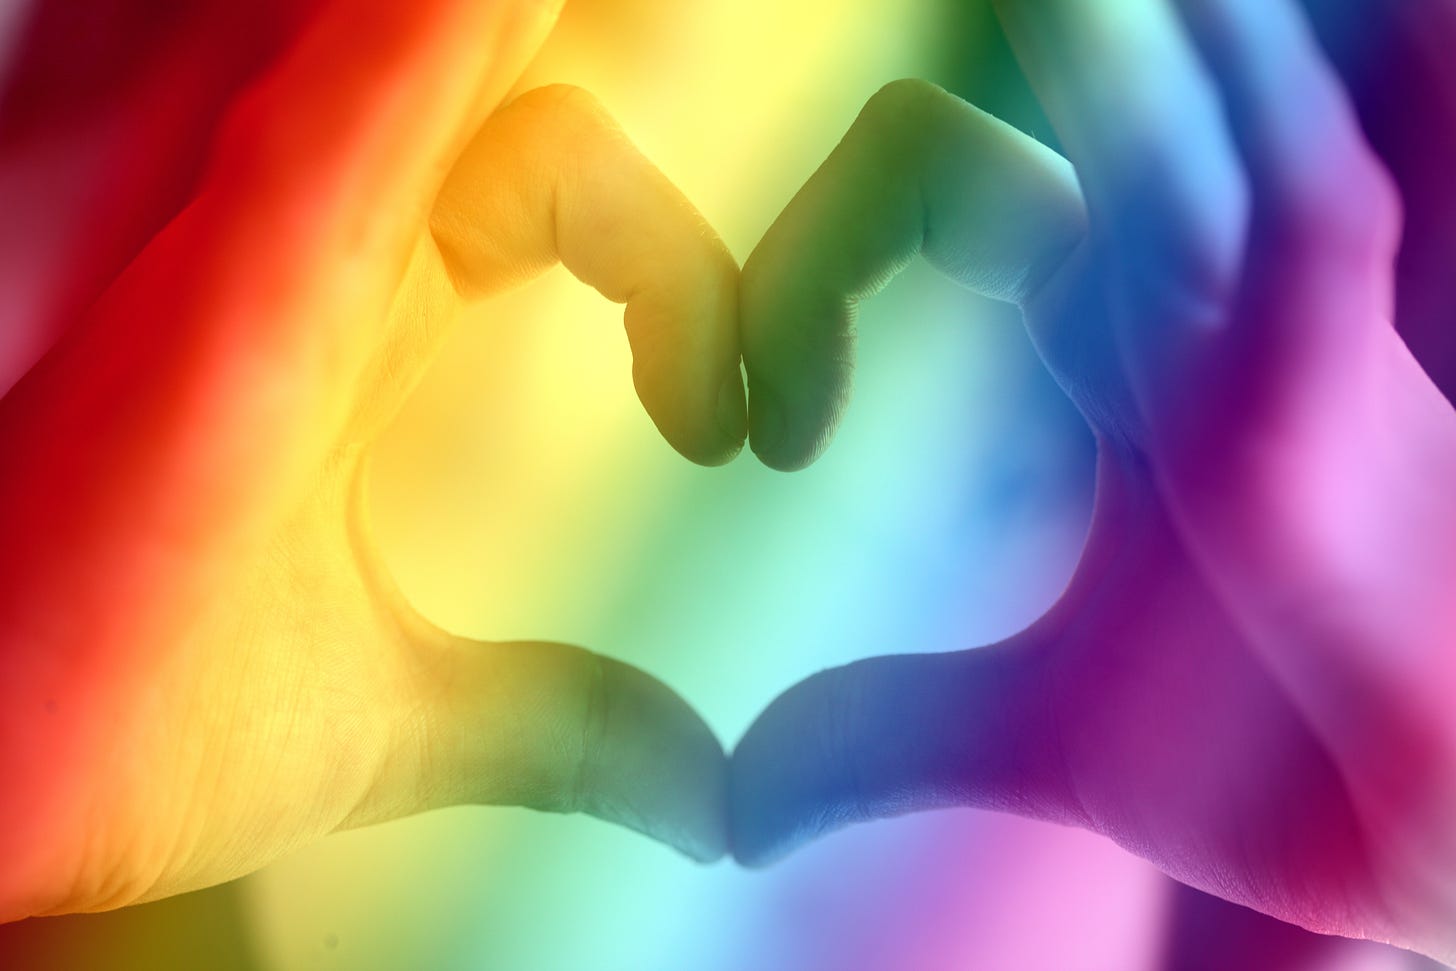 A woman makes a heart shape with her hands as rainbow light reflects on them in a diagonal pattern from the upper left hand corner to the lower righthand corner from dark red to light purple. I think they're white hands but it's hard to tell. It's a real artsy fartsy photo 